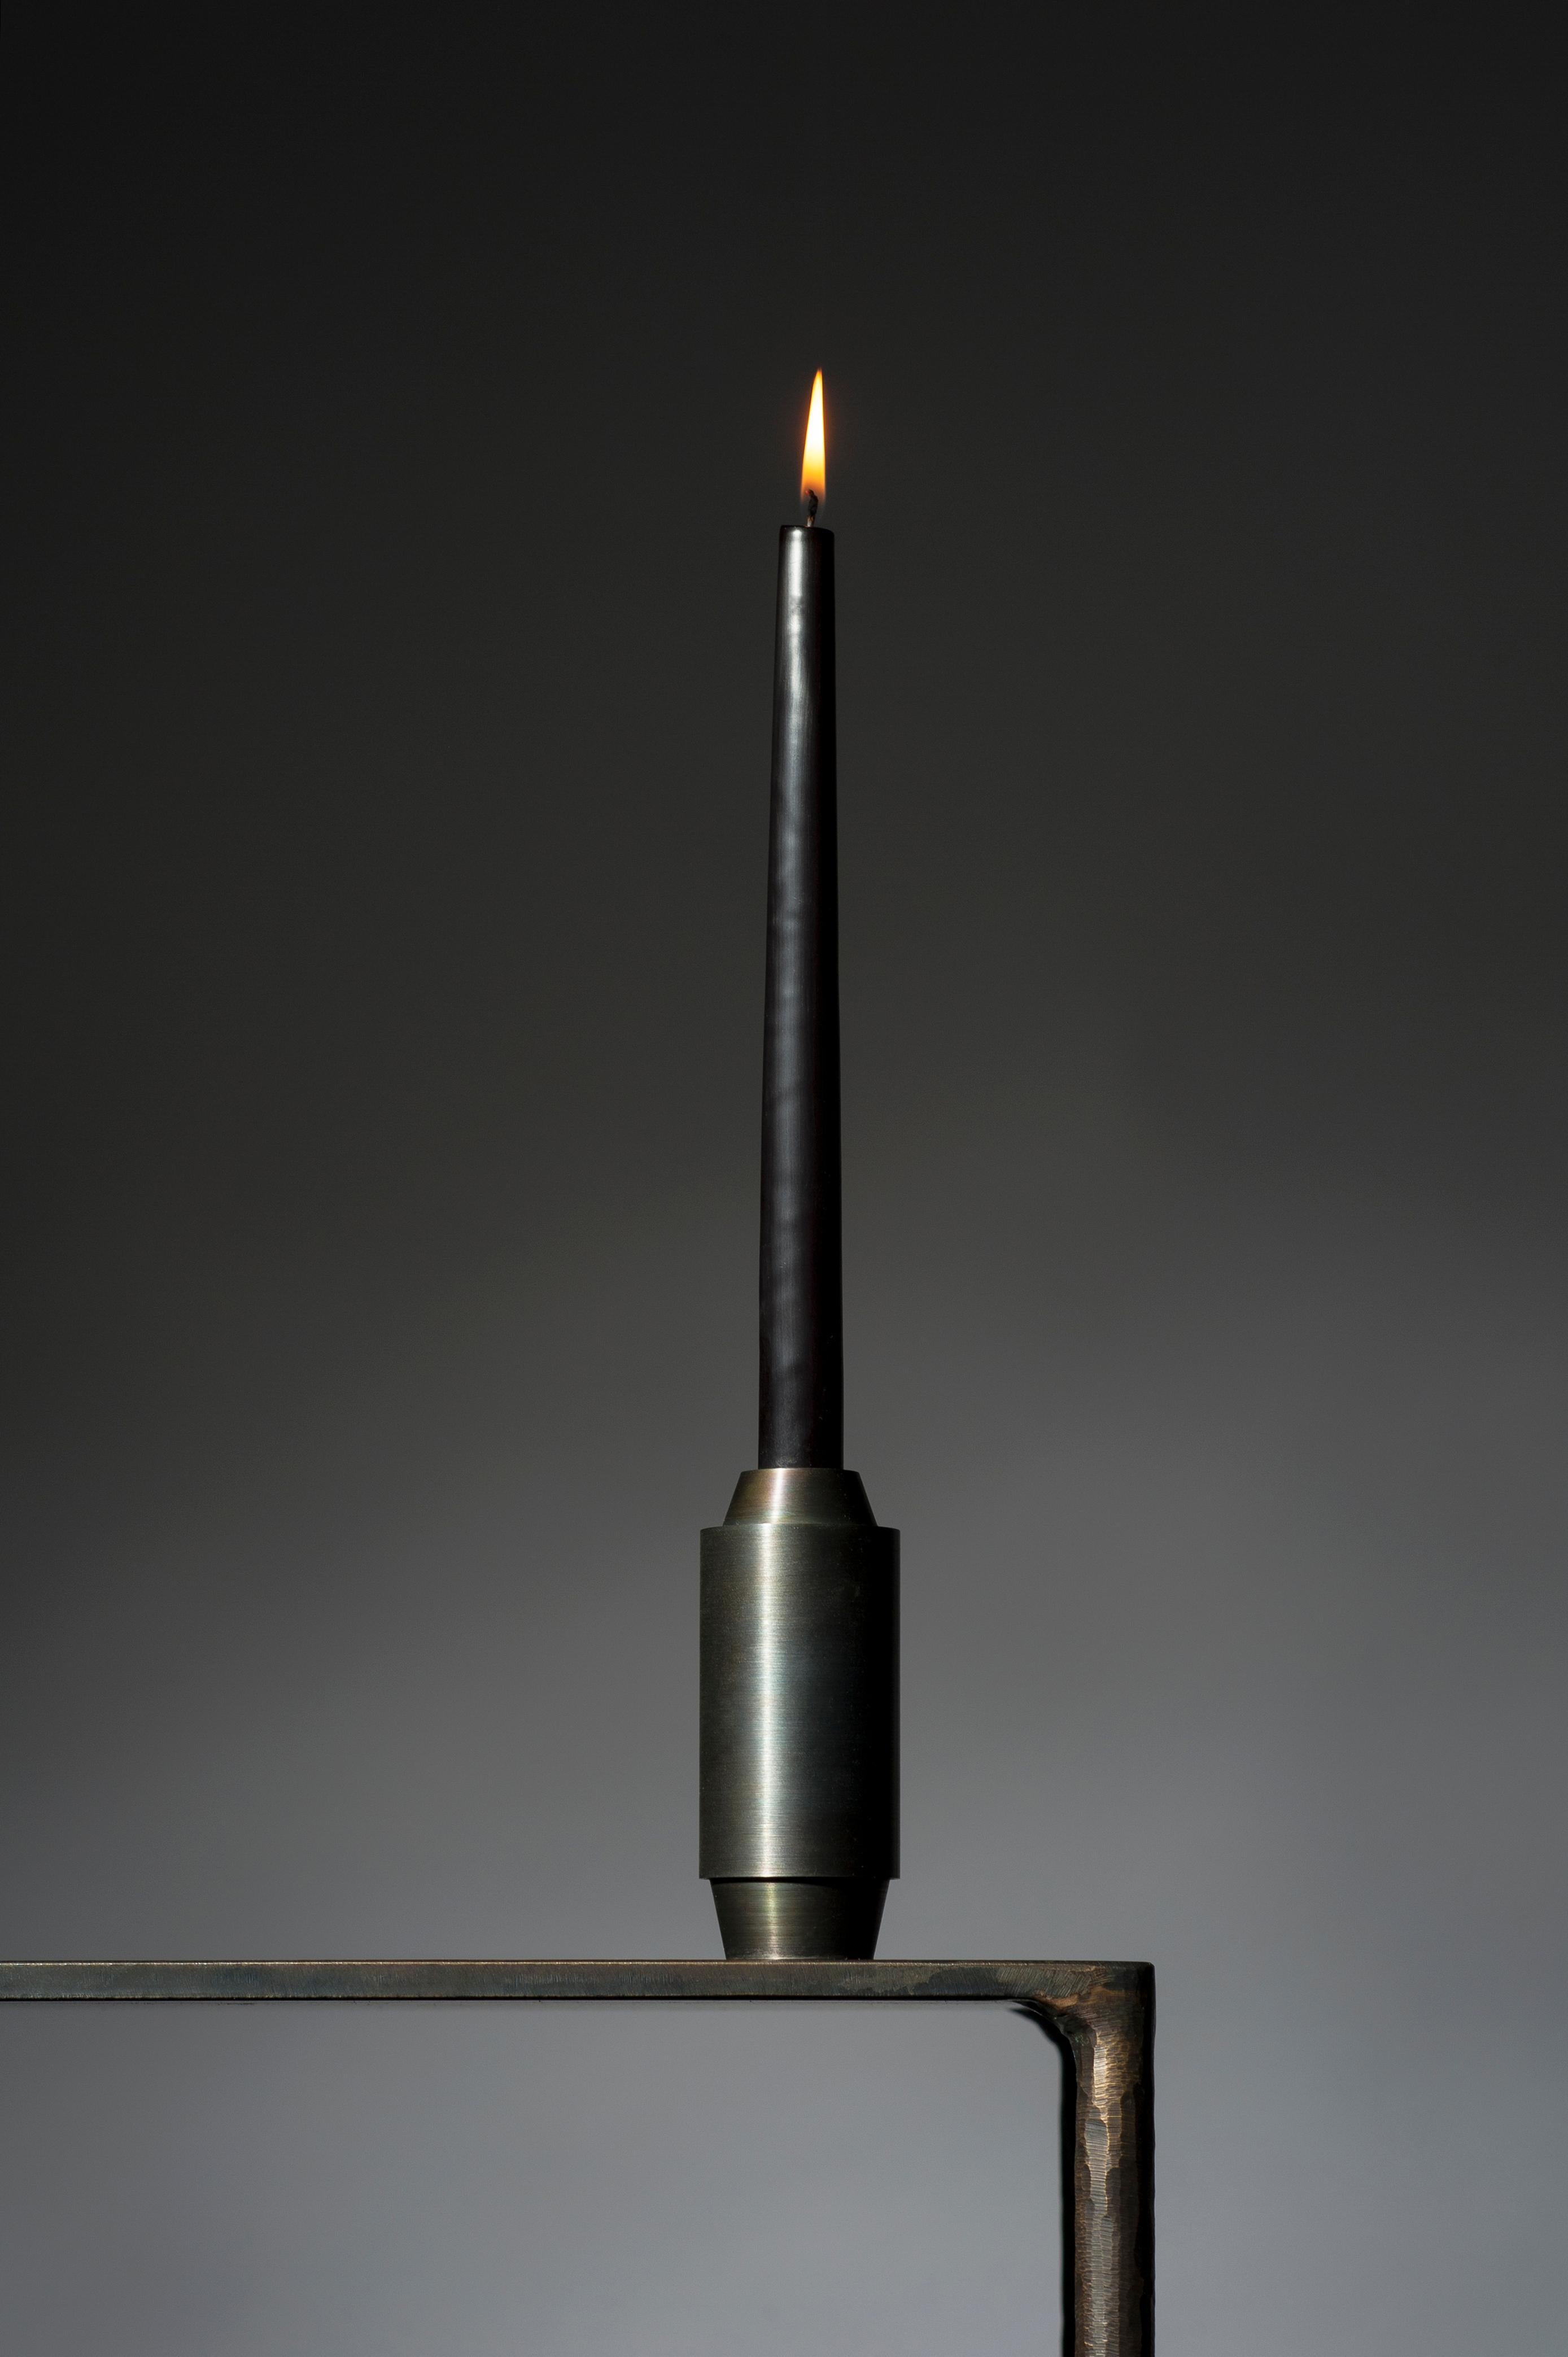 Patina on steel candlestick by Lukasz Friedrich
Dimensions: D 5 x H 12 cm
Materials: Patina on steel

Also available: D 5 x H 14 cm.